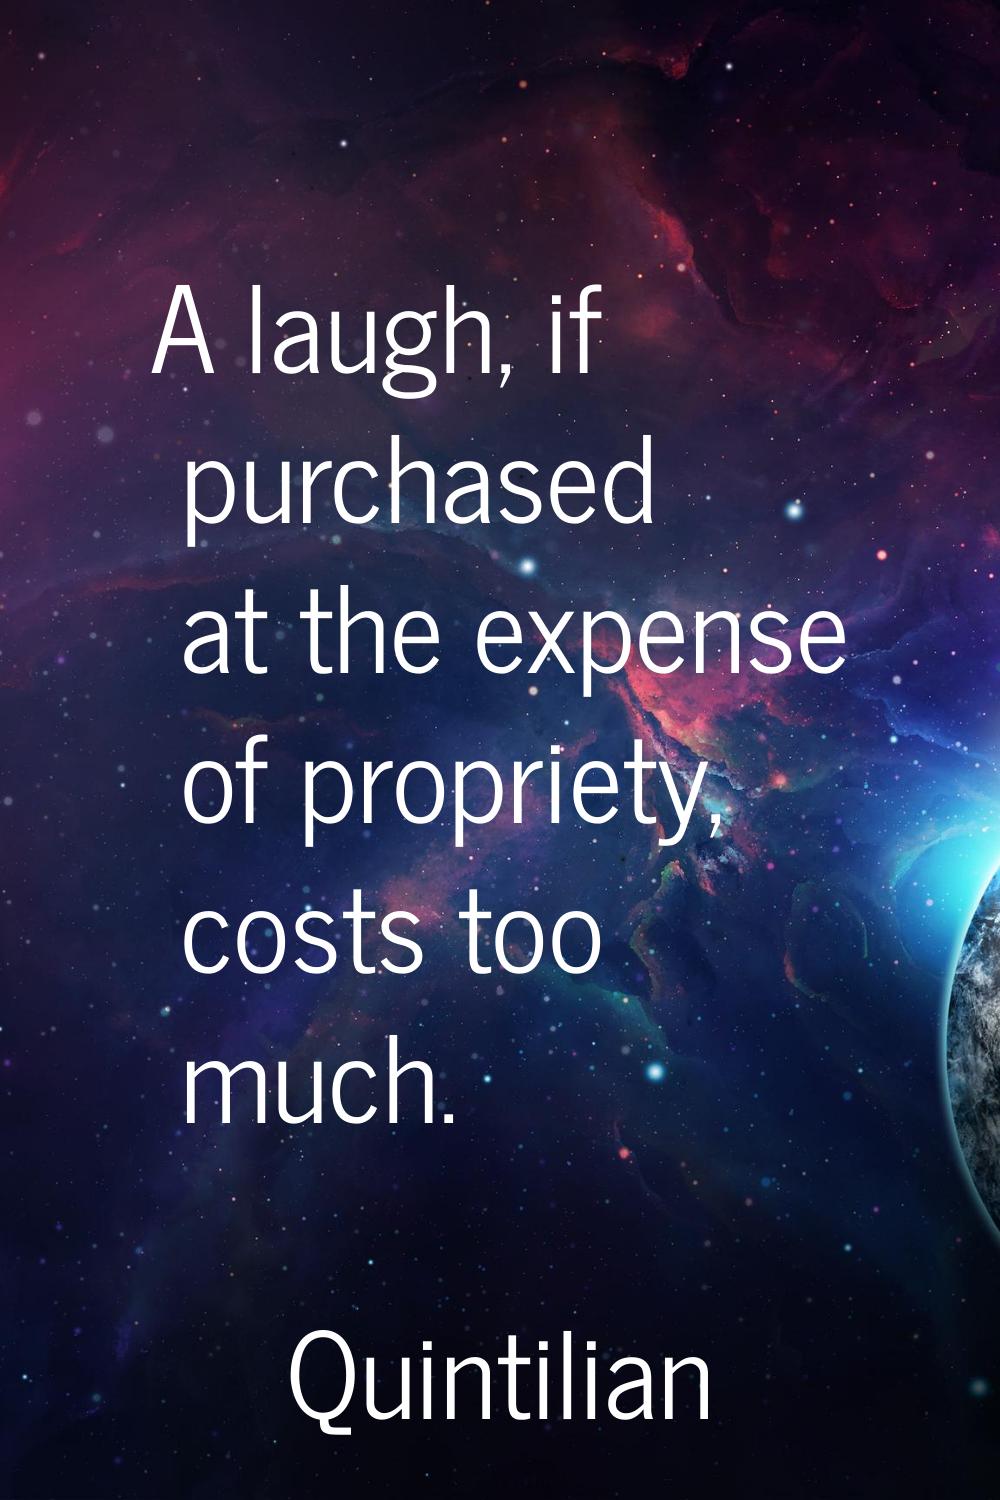 A laugh, if purchased at the expense of propriety, costs too much.